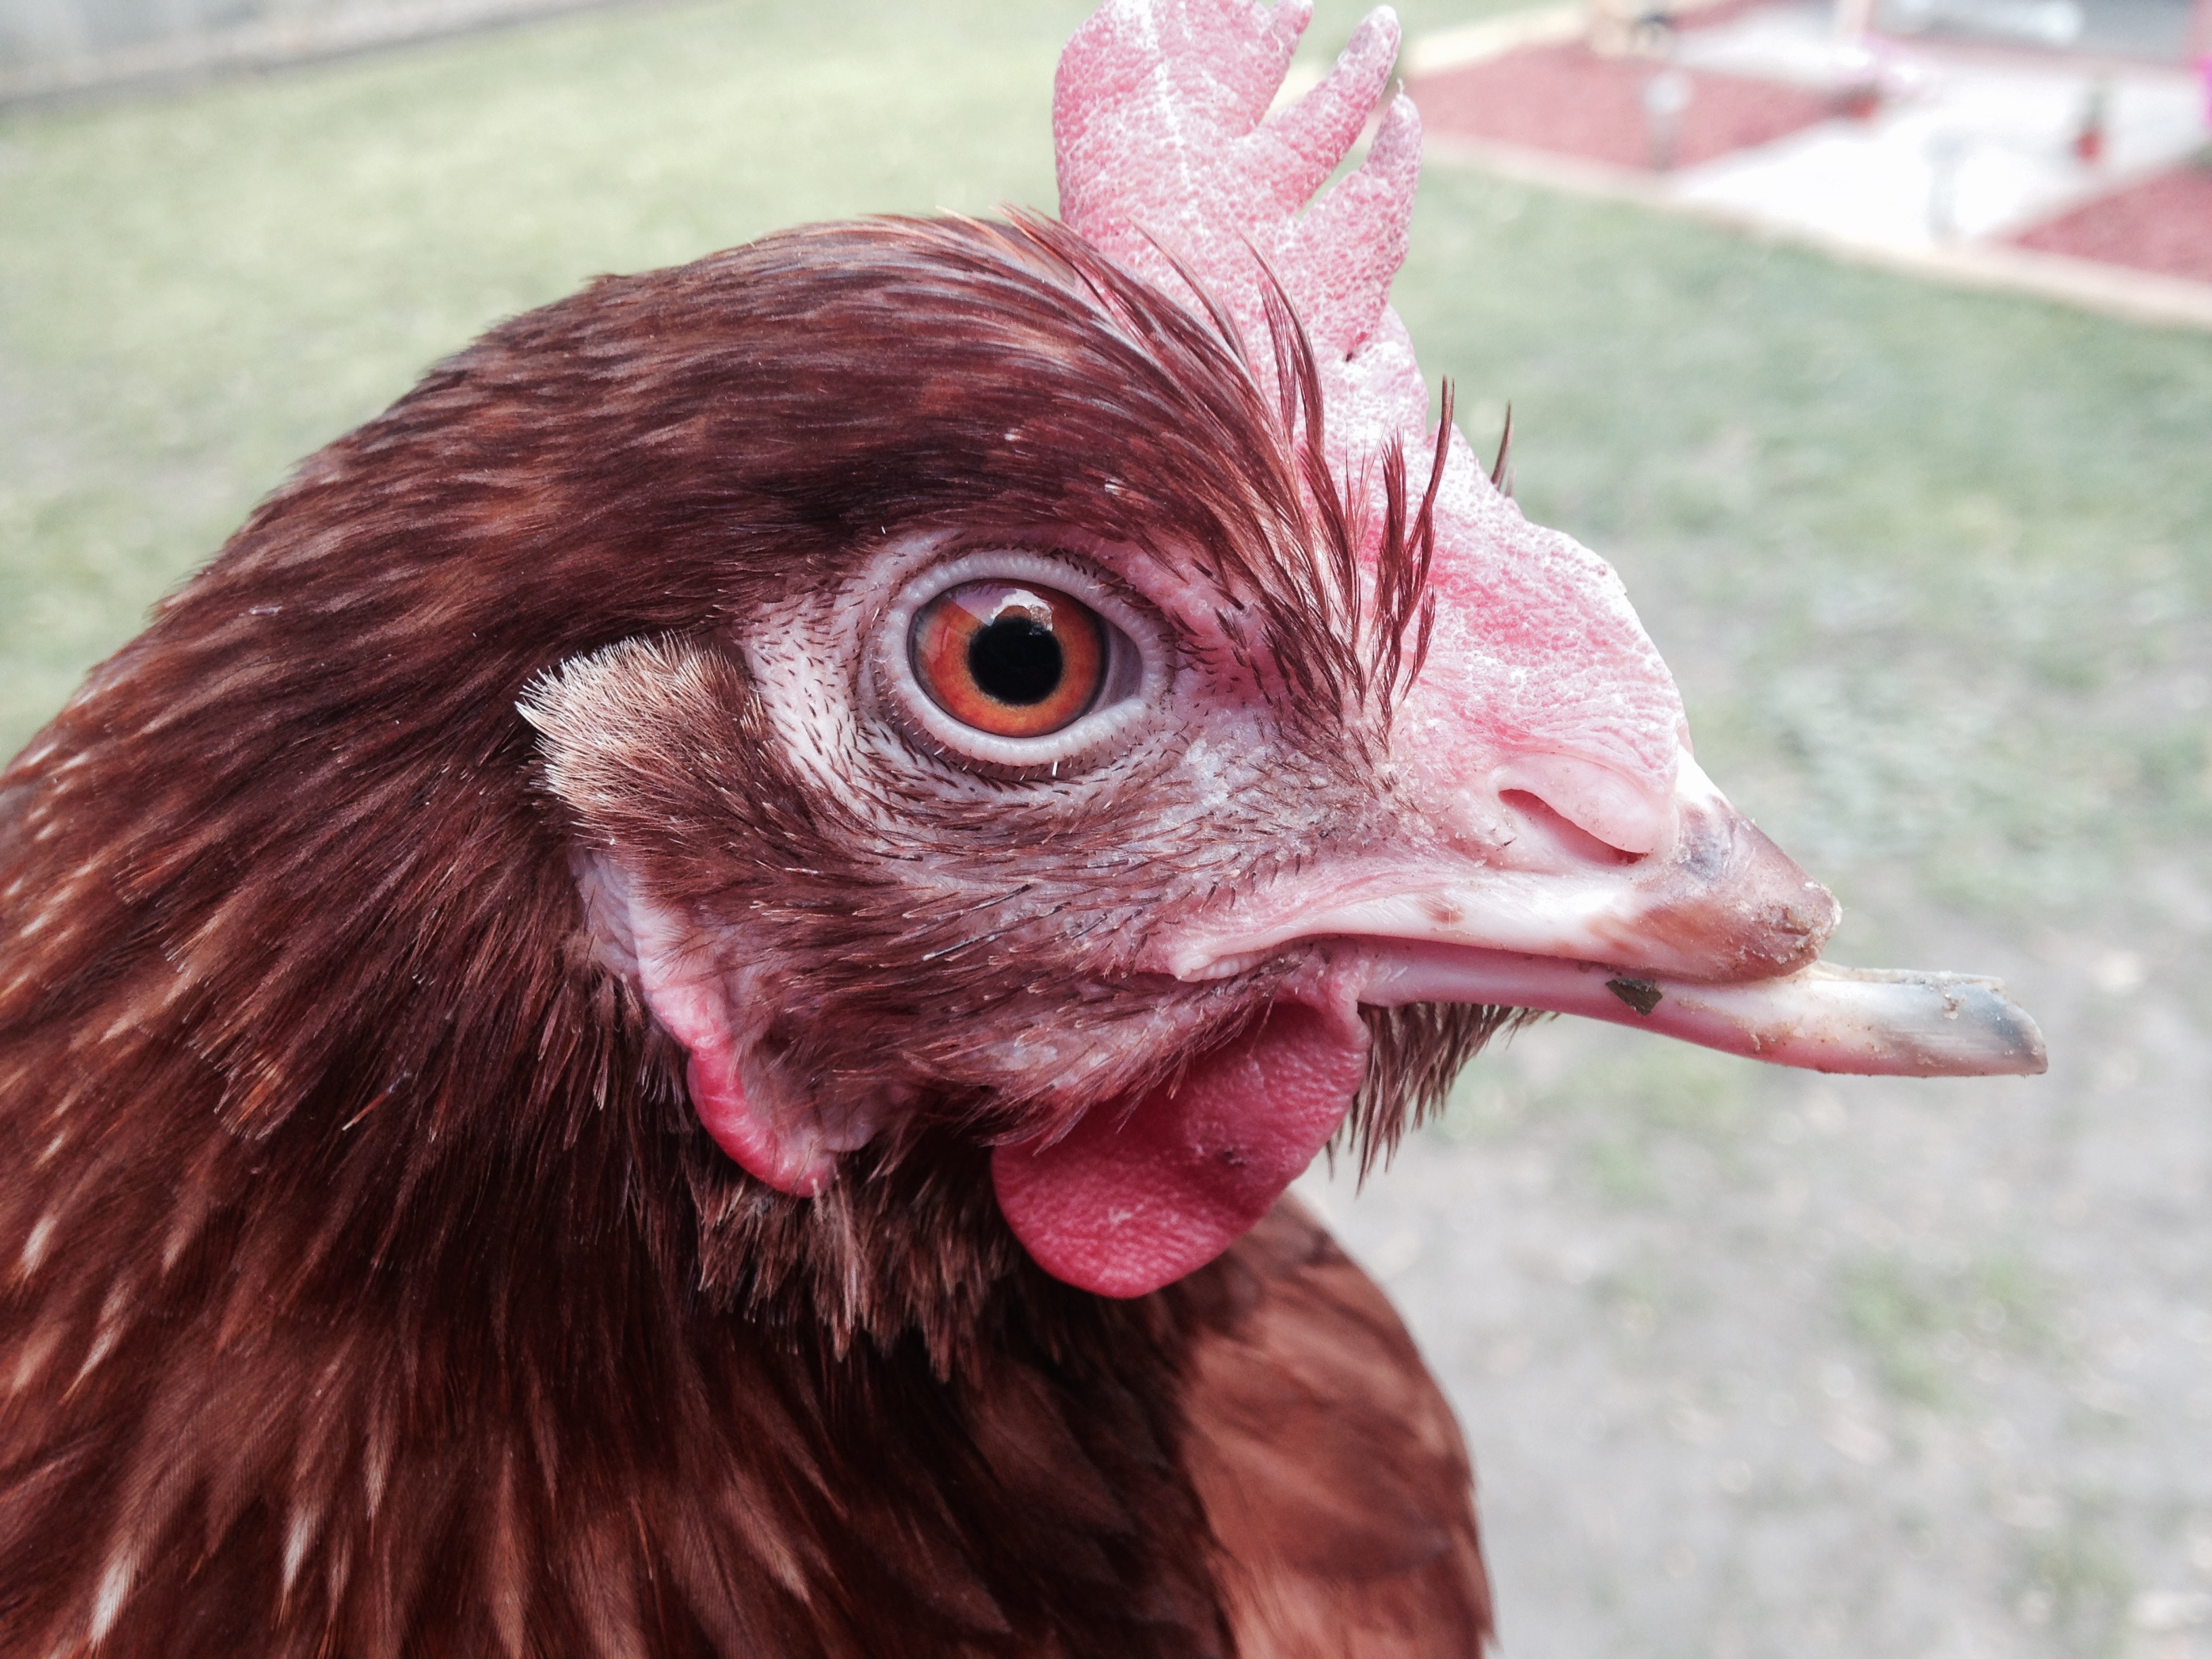 New hen owner of 2 weeks. Will my poor Greta's beak ever grow back? I noticed its hard for her to pluck off the ground. I keep a deep dish full of food for her and it seems to work out better for her.